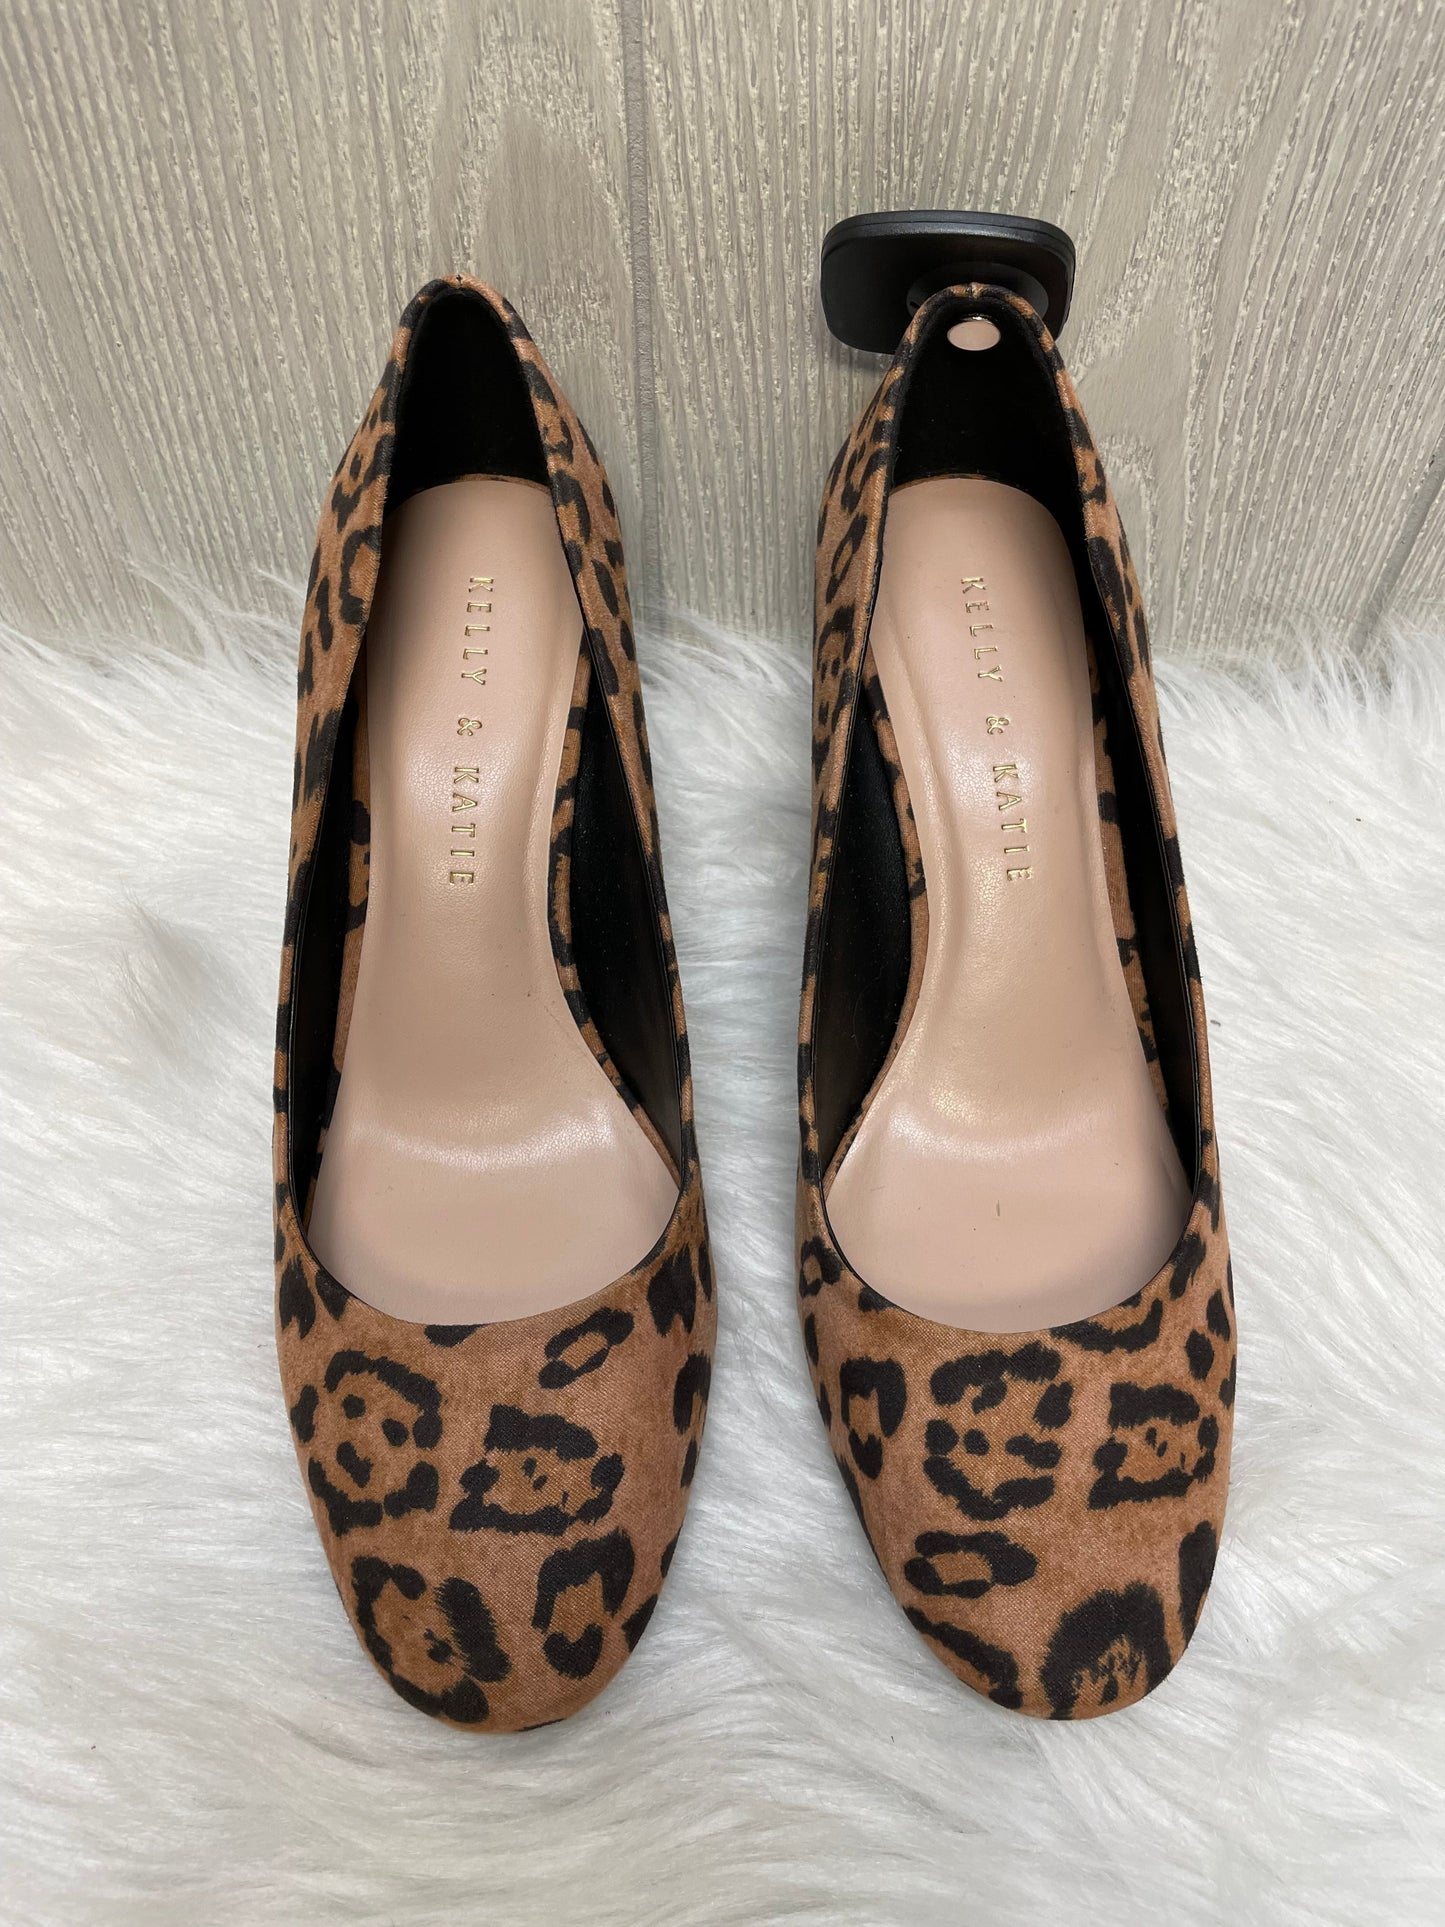 Animal Print Shoes Heels Block Kelly And Katie, Size 7.5